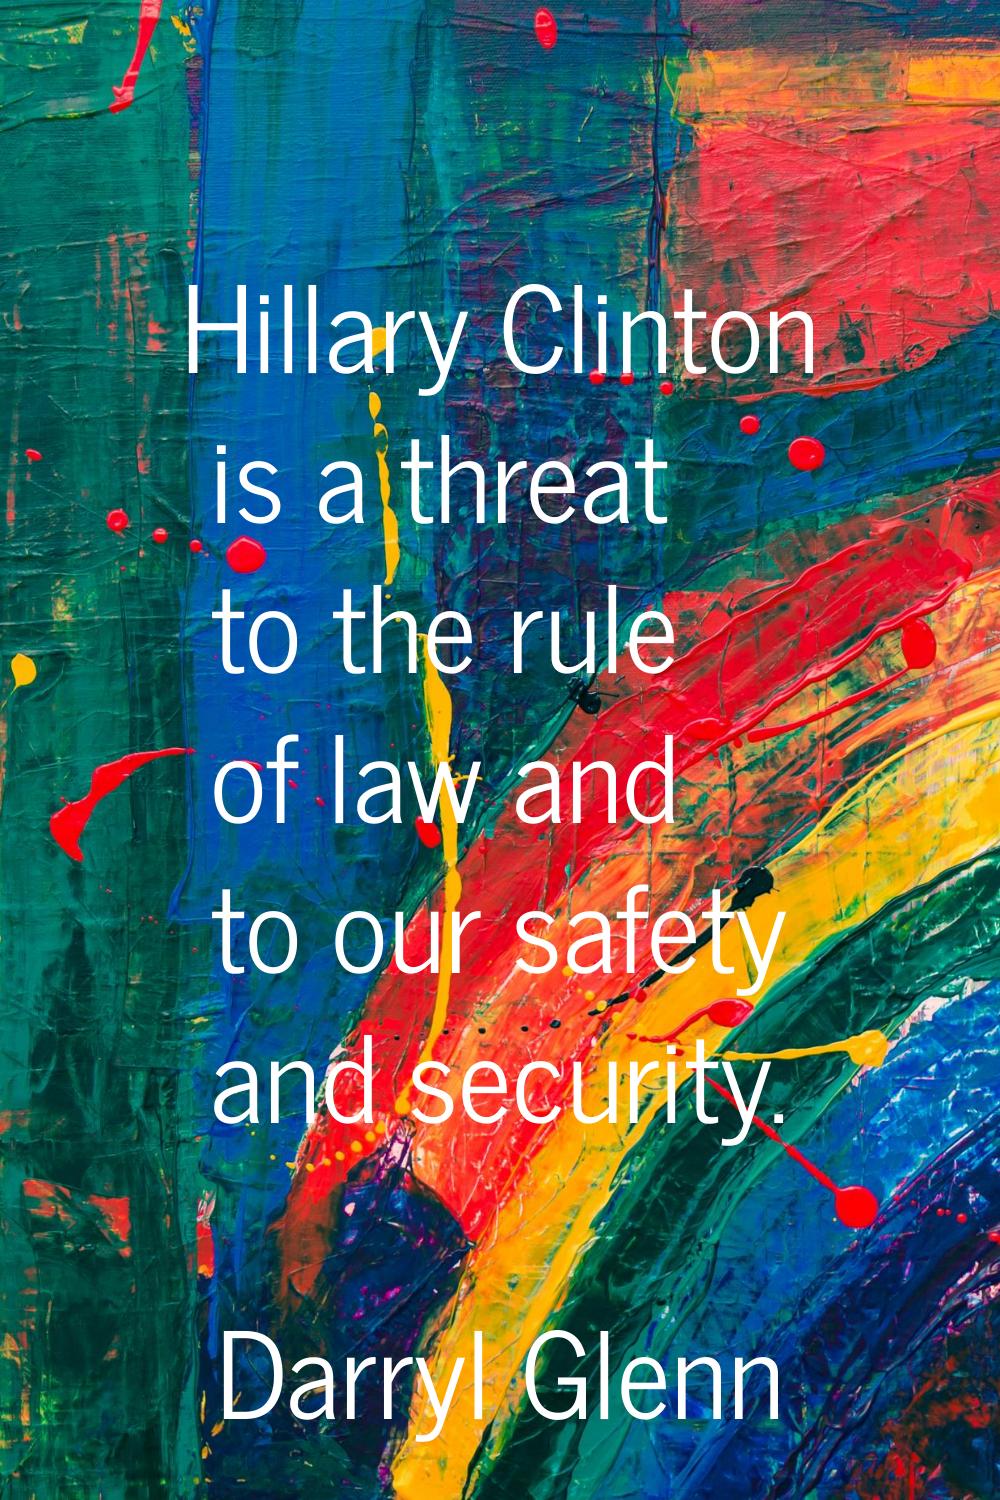 Hillary Clinton is a threat to the rule of law and to our safety and security.